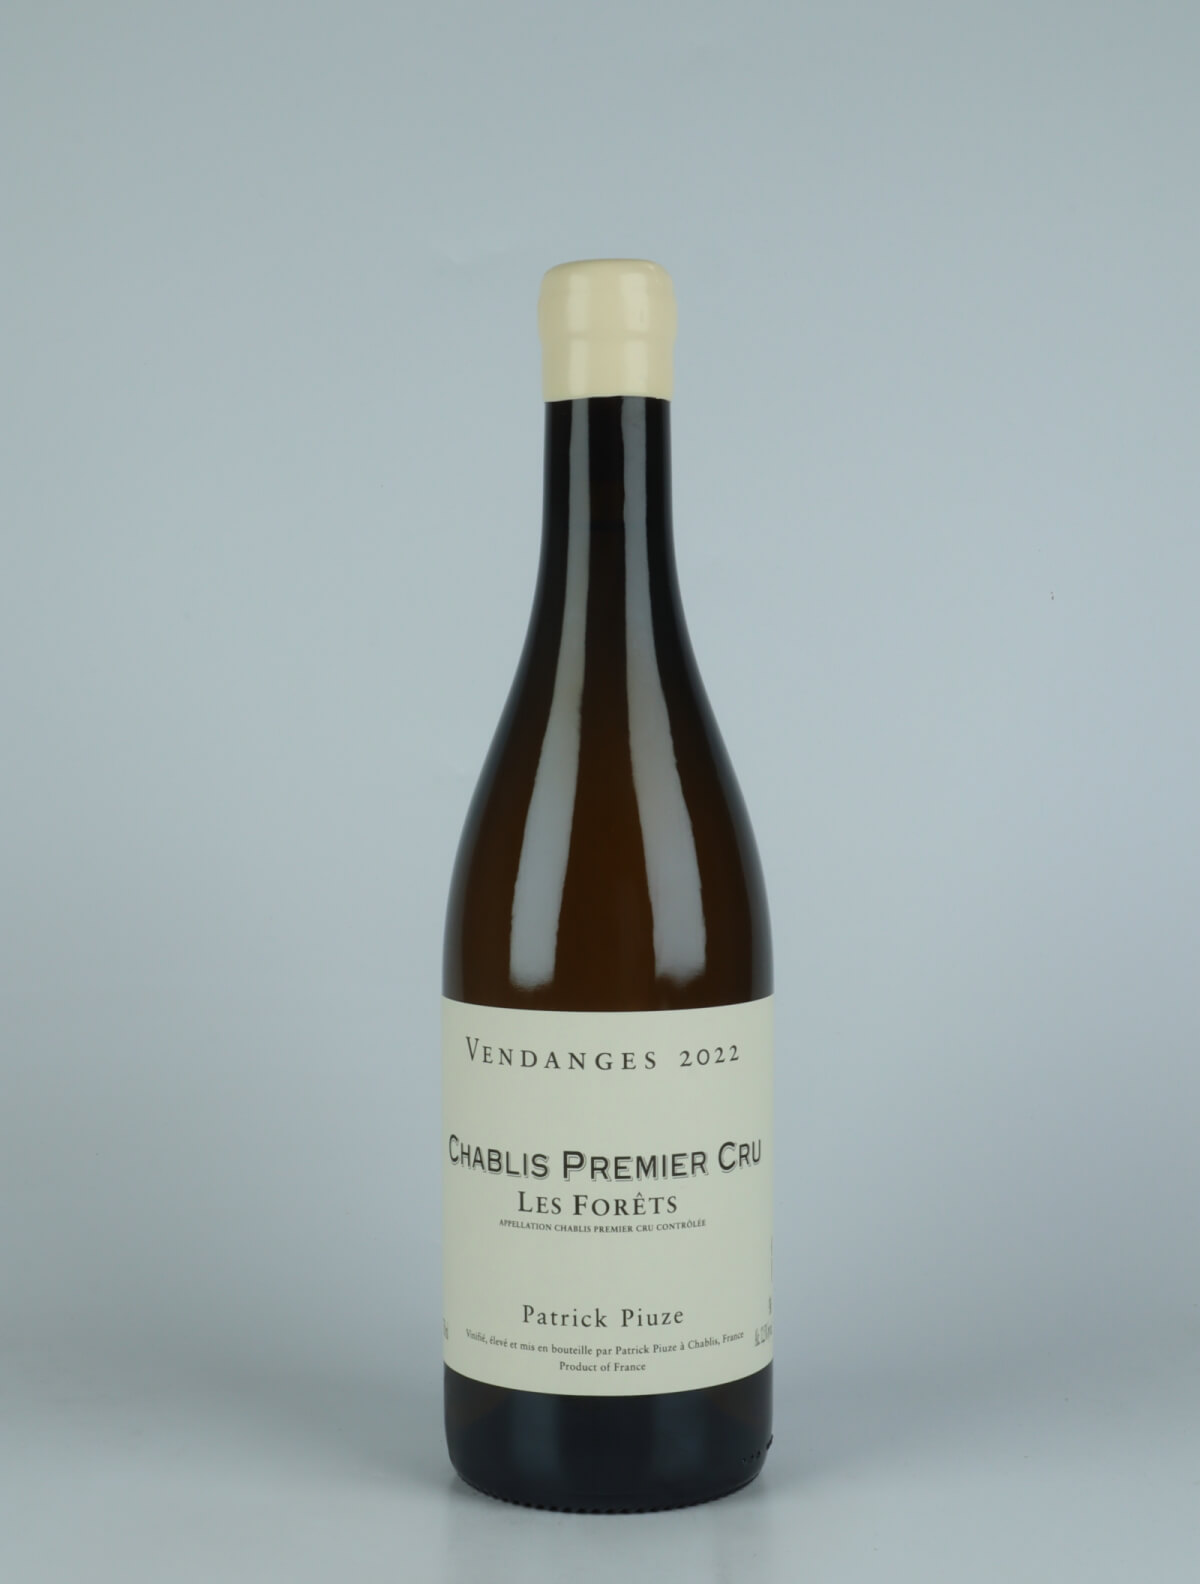 A bottle 2022 Chablis 1. Cru - Les Forêts White wine from Patrick Piuze, Burgundy in France